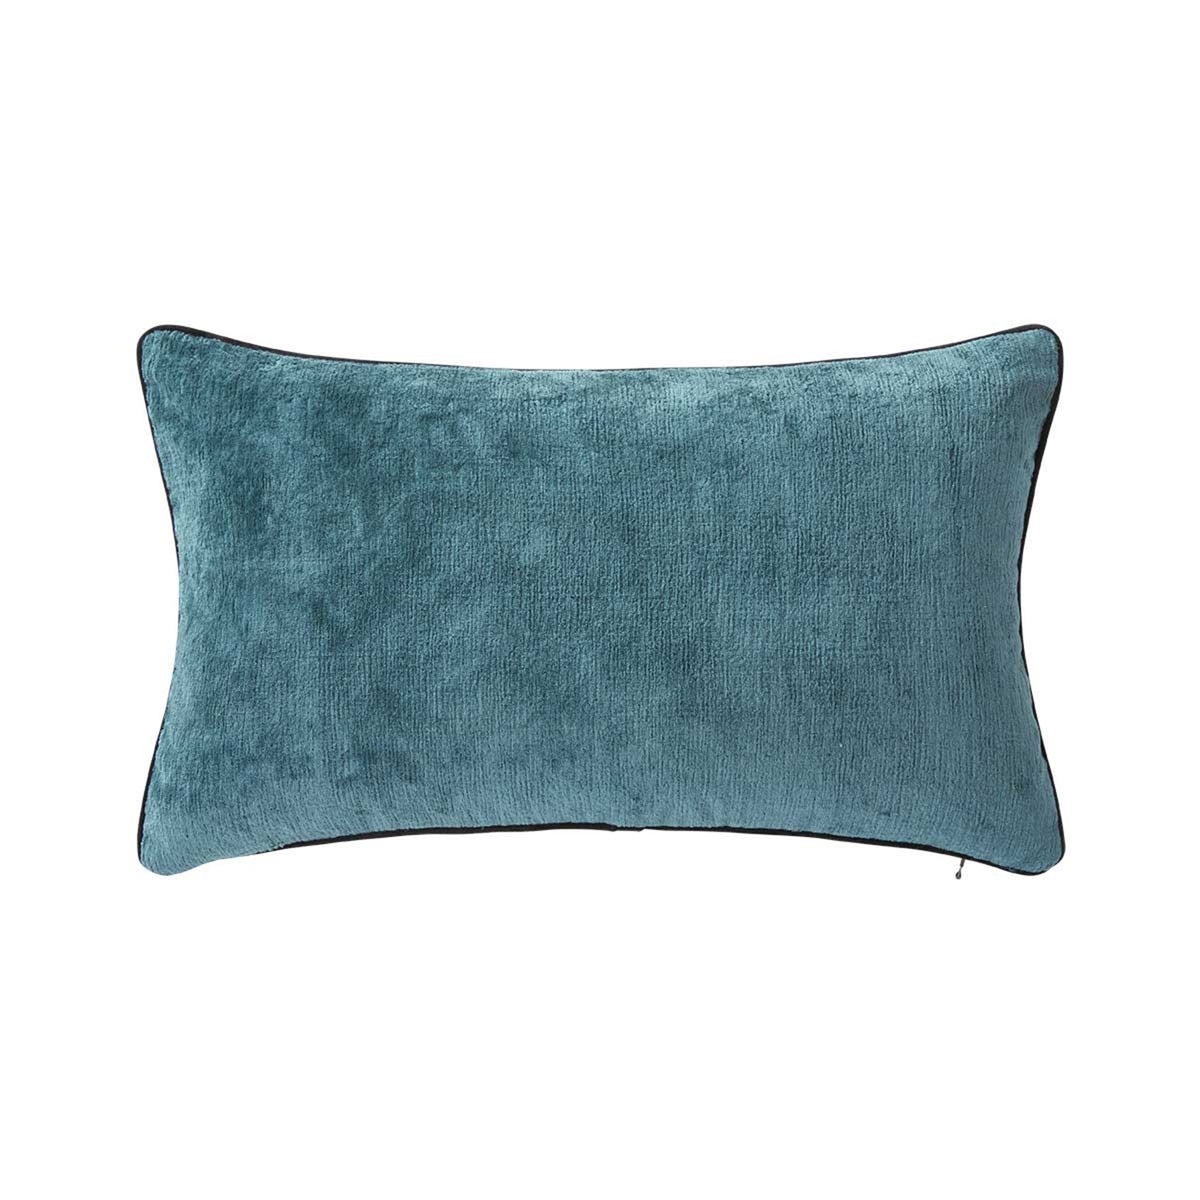 Silo Image of Yves Delorme Iosis Boromee Rectangle Decorative Pillow in Paon Color